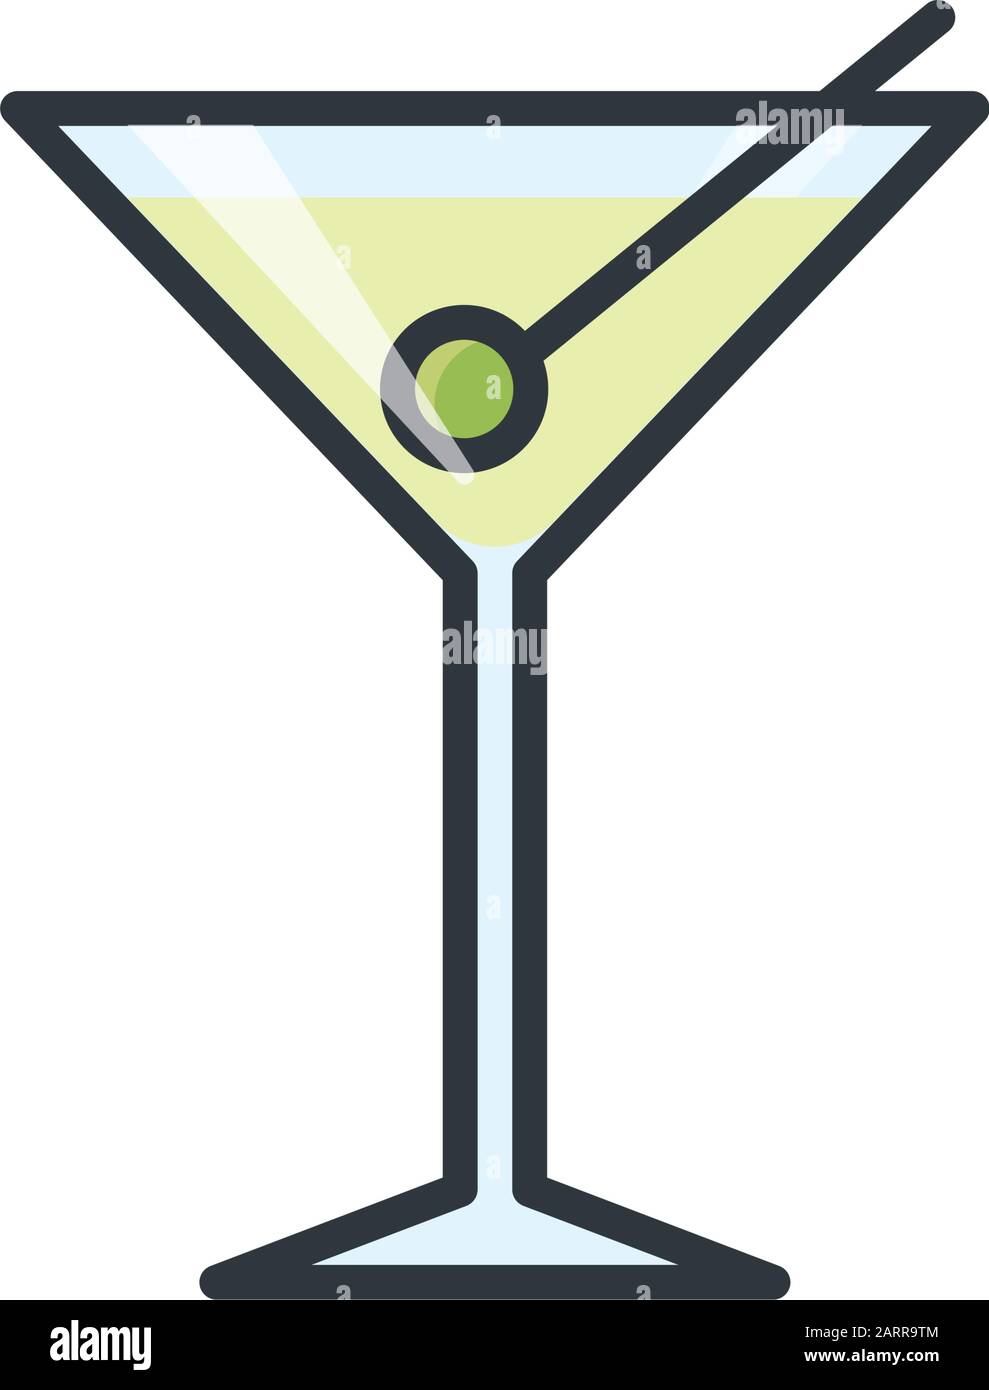 Cocktail Glasses Cocktail Glass Margarita Glass Hurricane Glass Vector  Illustration Black Silhouettes Isolated On A White Background Stock  Illustration - Download Image Now - iStock